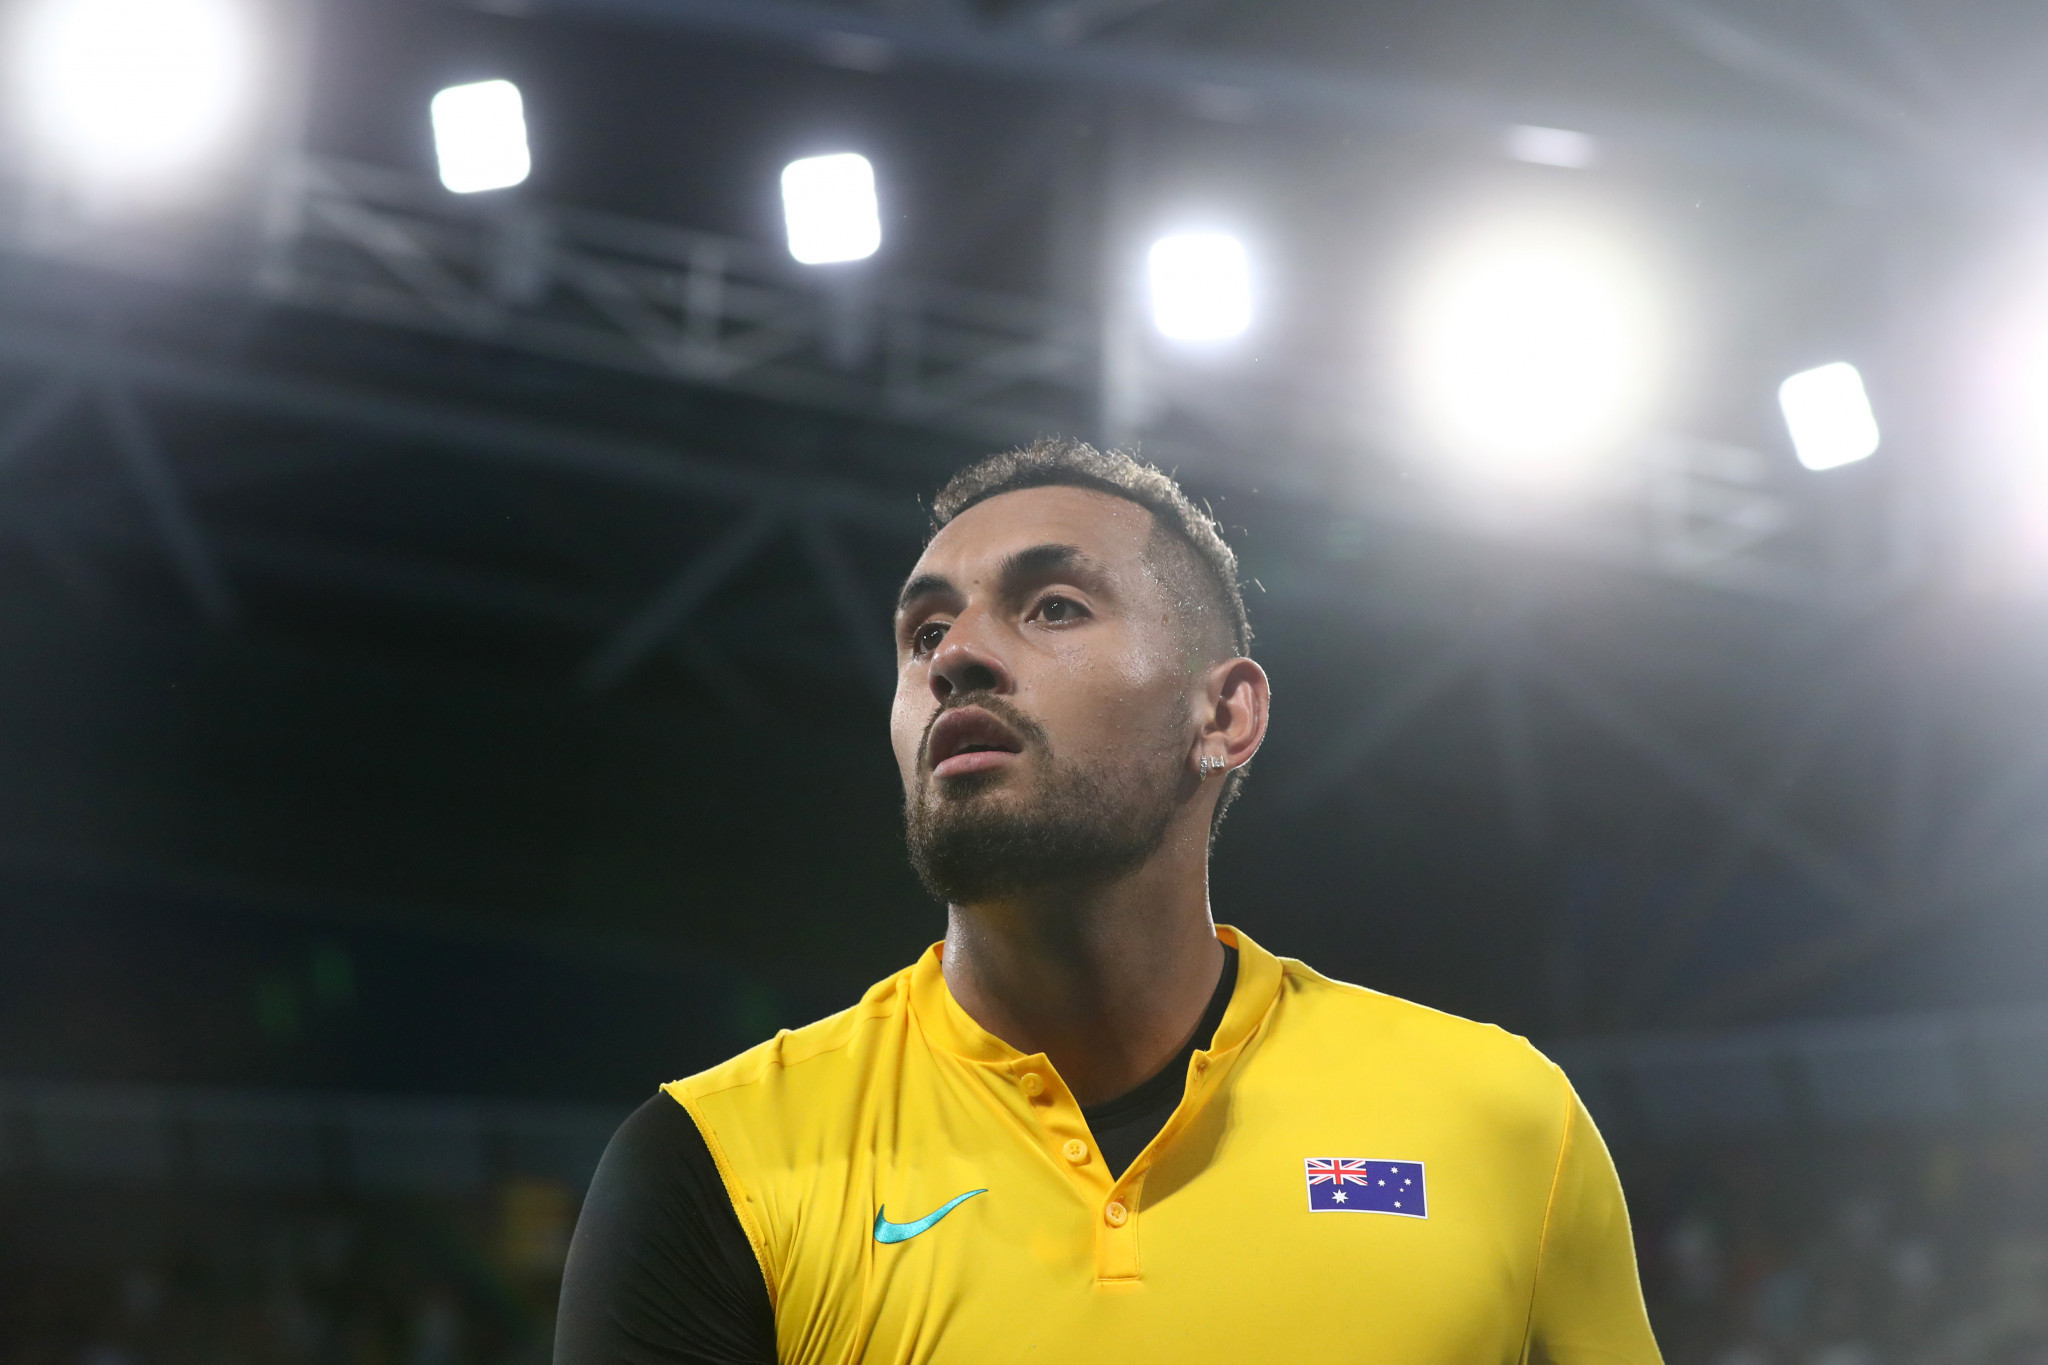 Nick Kyrgios was emotional after helping hosts Australia to a win over Germany at the inaugural ATP Cup ©Getty Images